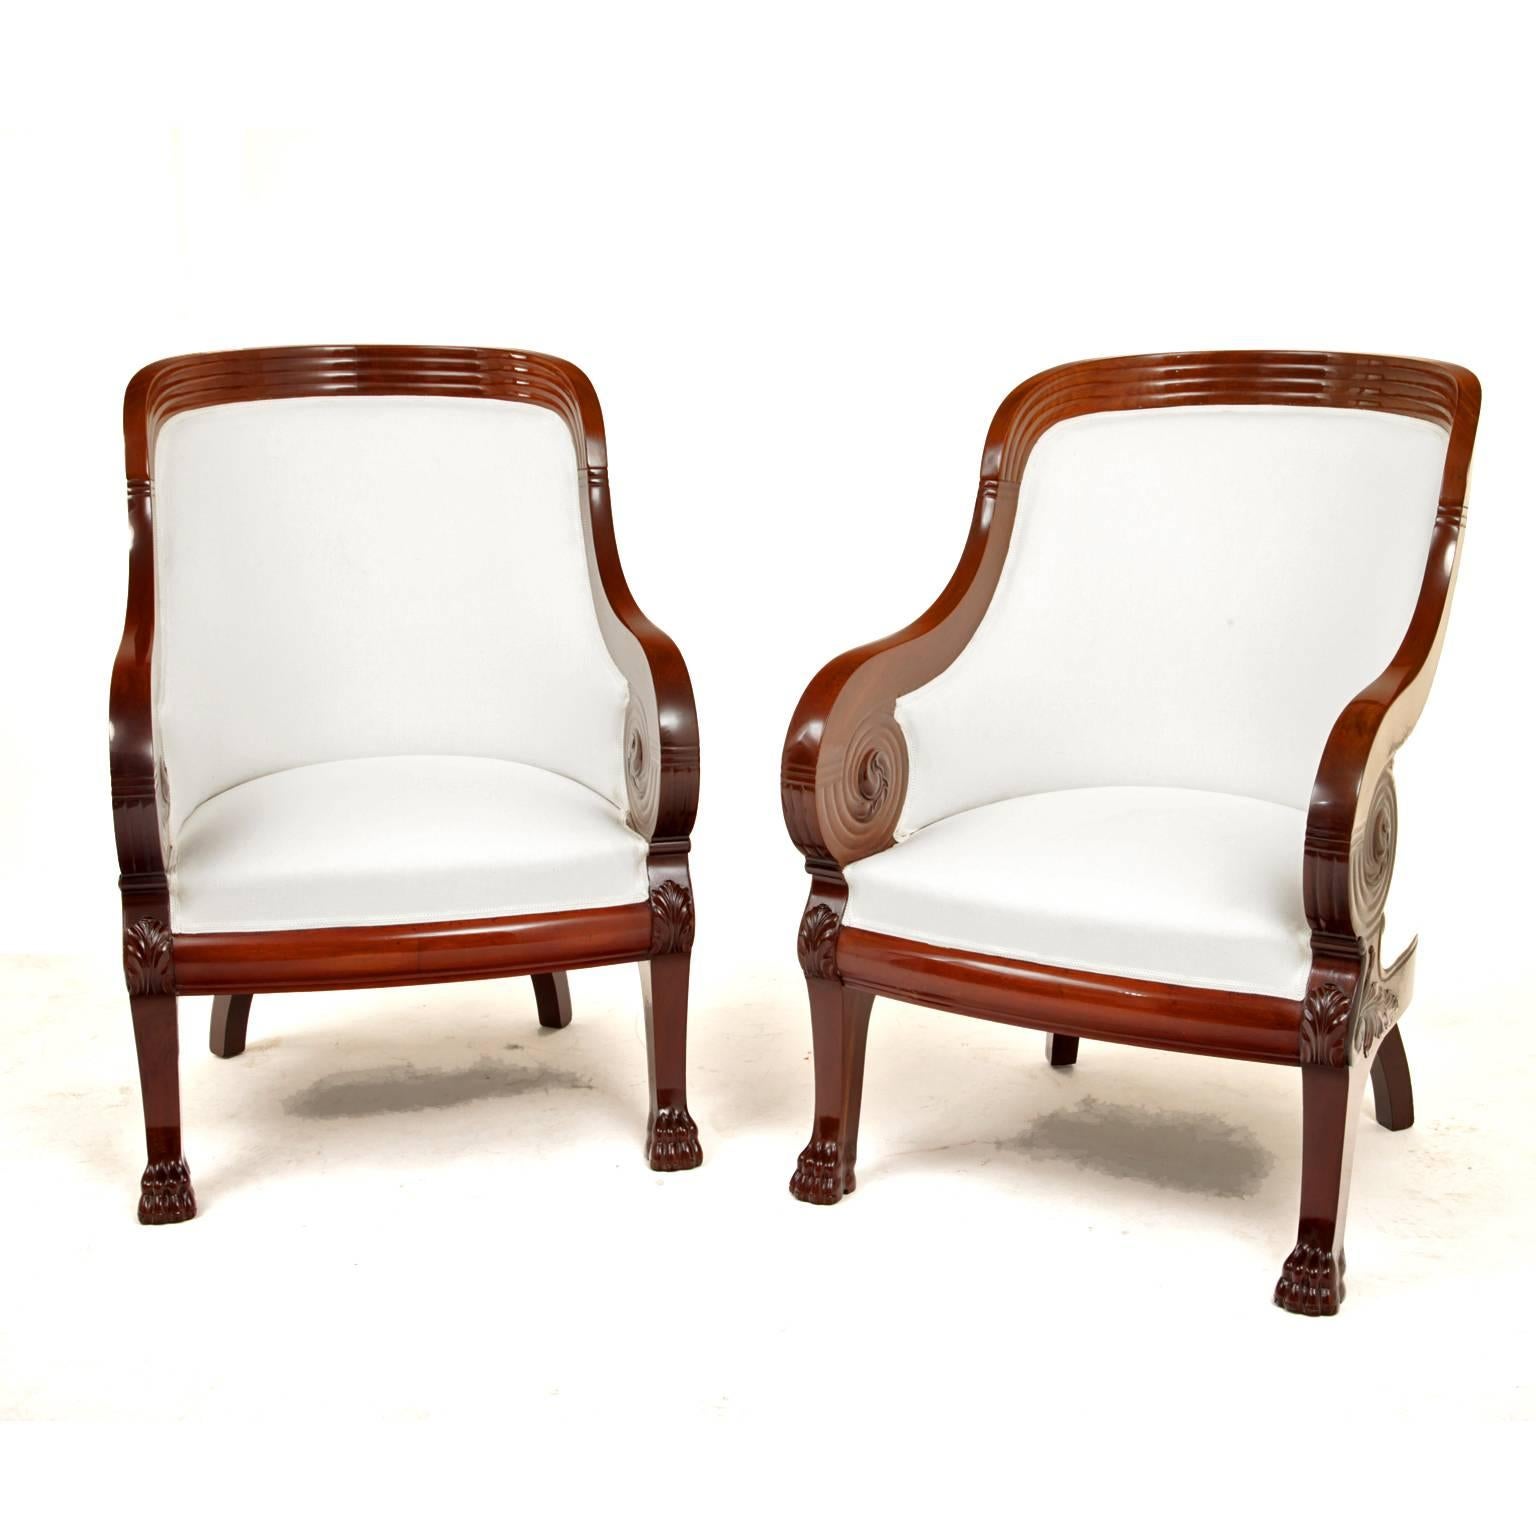 Pair of armchairs on lion's feet with scrolled armrests and a curved backrest.